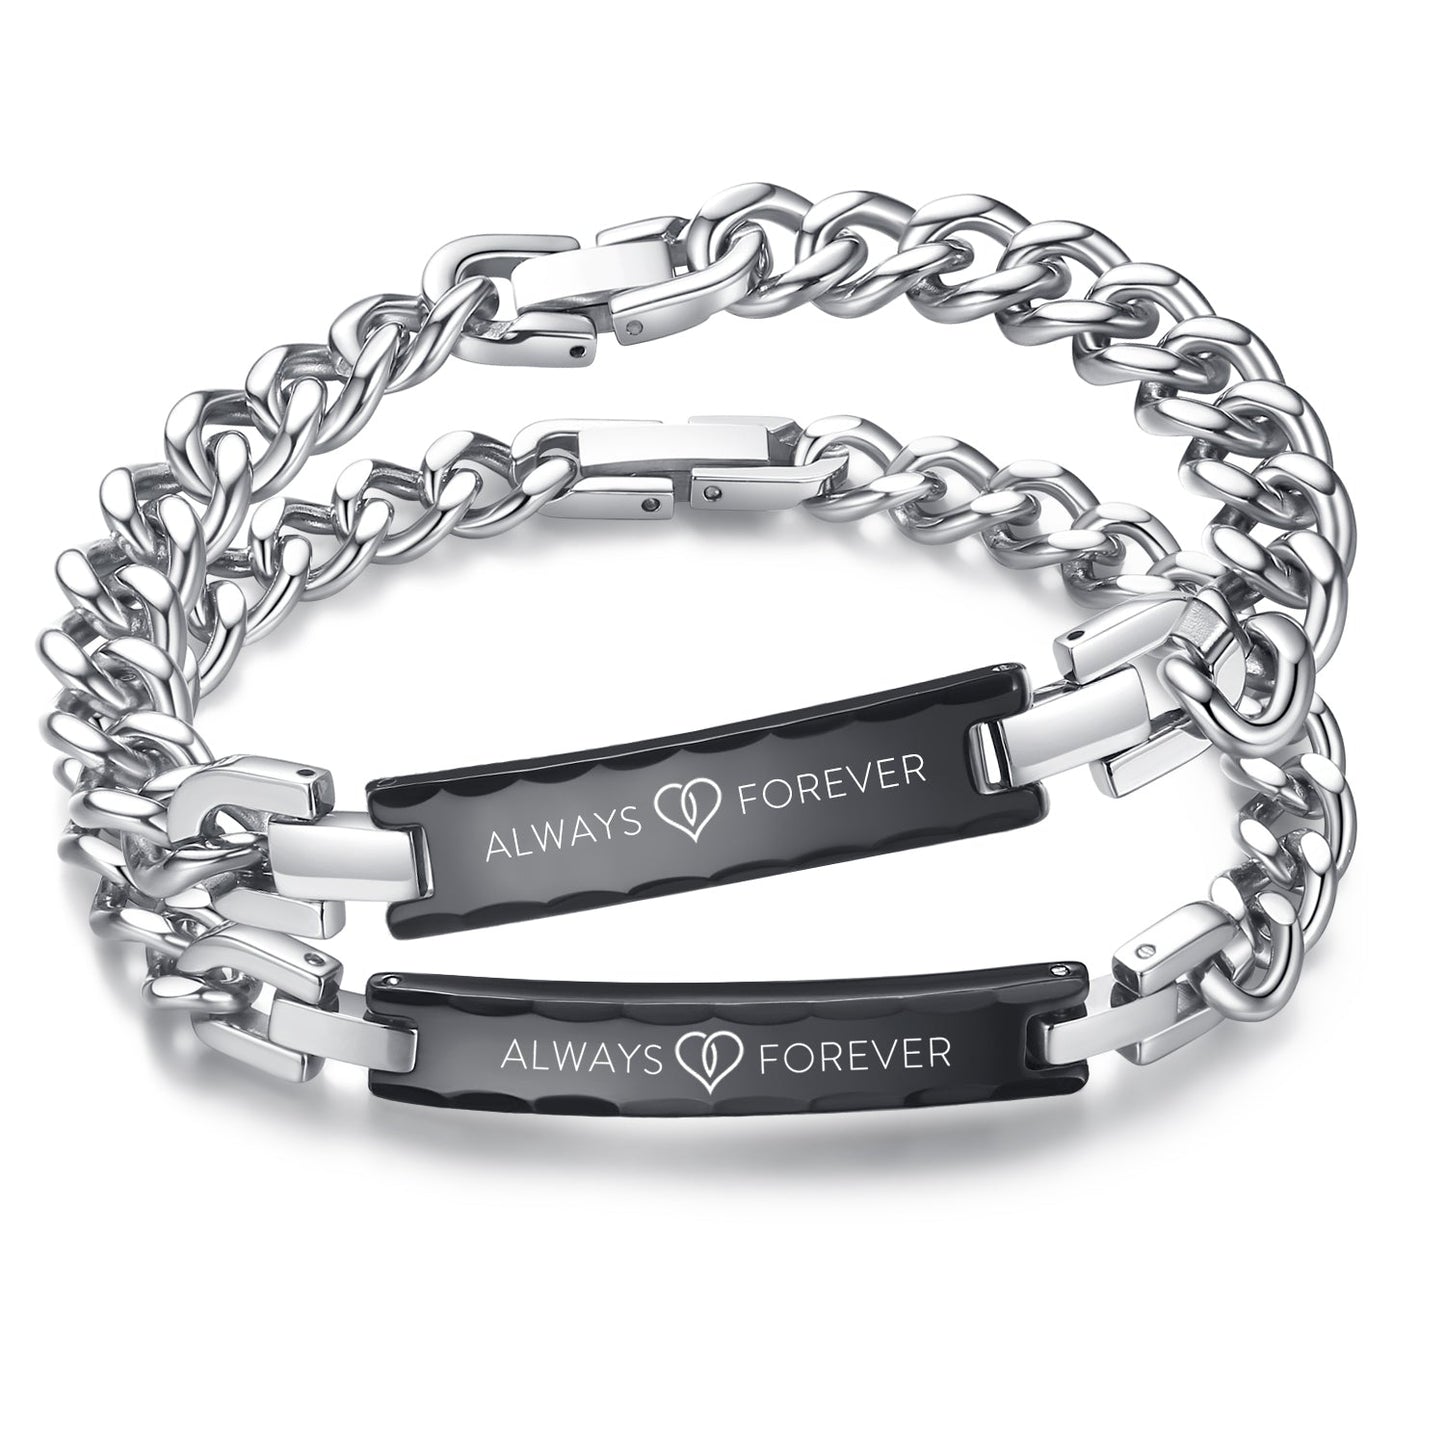 Always&Forever Couples Bracelets His and Hers Black Stainless Steel ID for Matching Relationship Bracelets for Couples